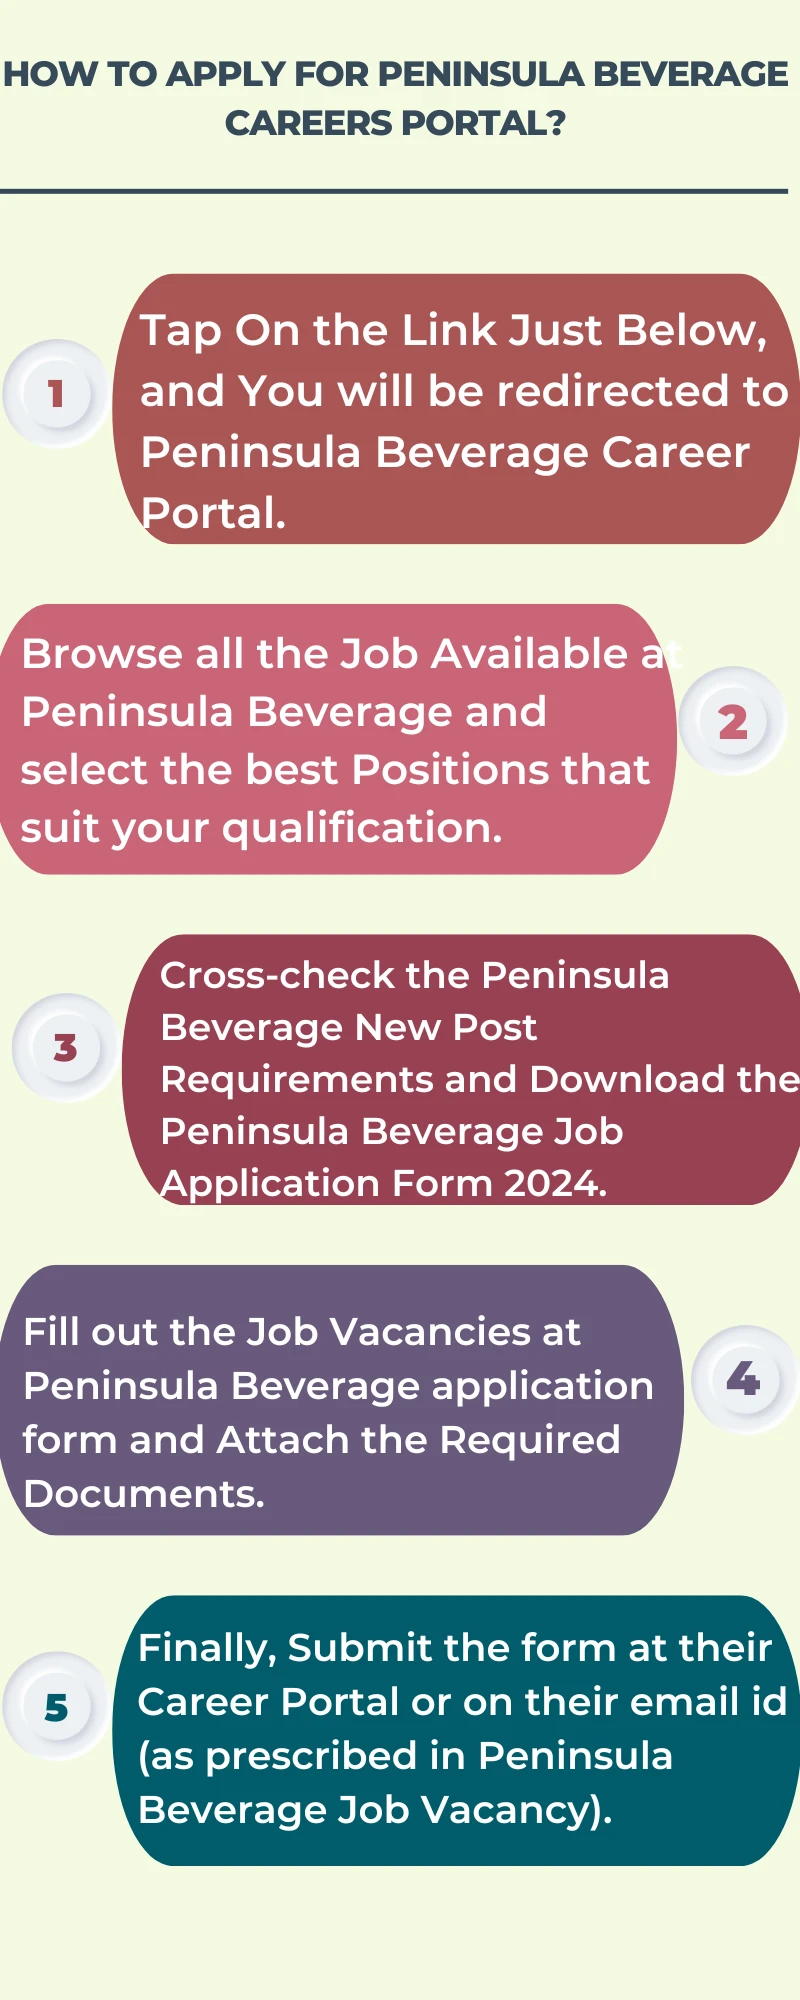 How To Apply for Peninsula Beverage Careers Portal?